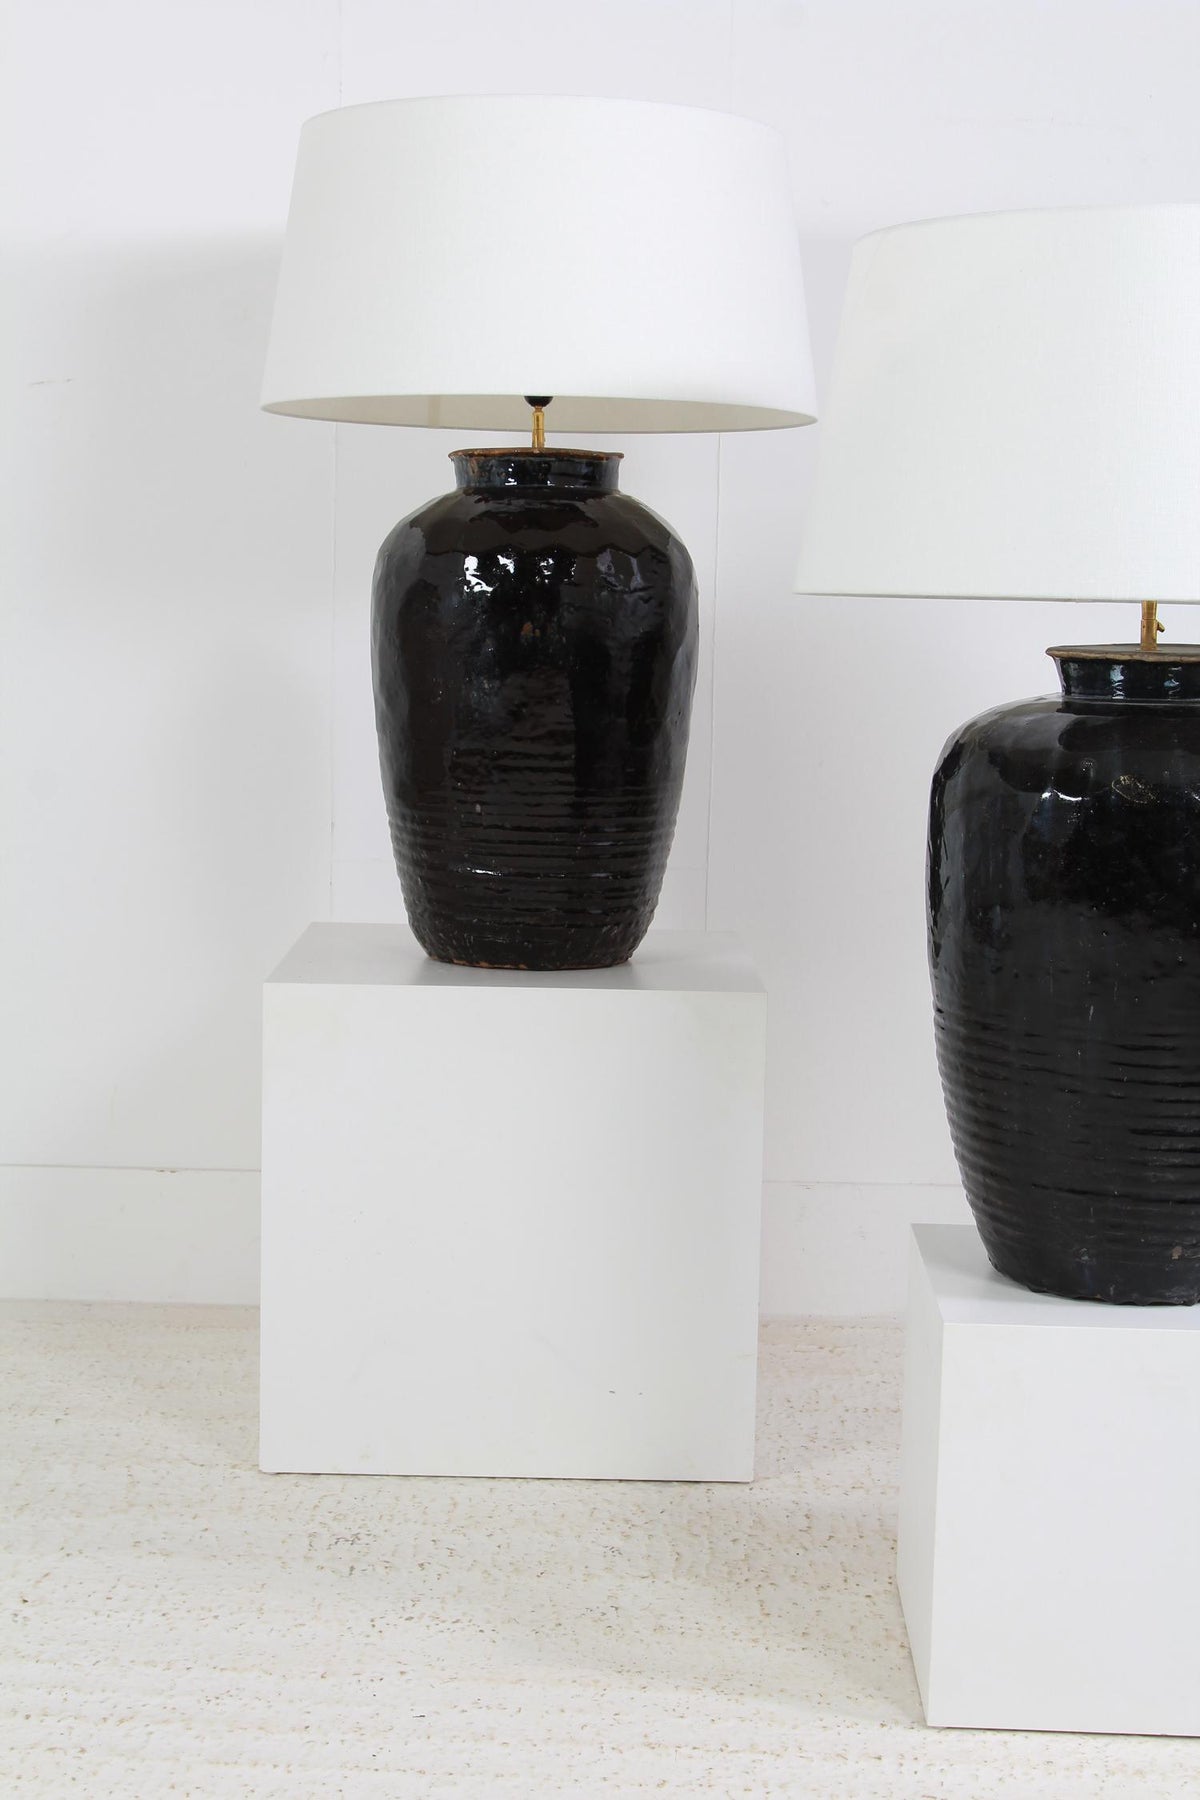 Monumental  ANTIQUE BLACK GLAZED POTTERY LAMPS WITH WHITE DRUM LINEN SHADES